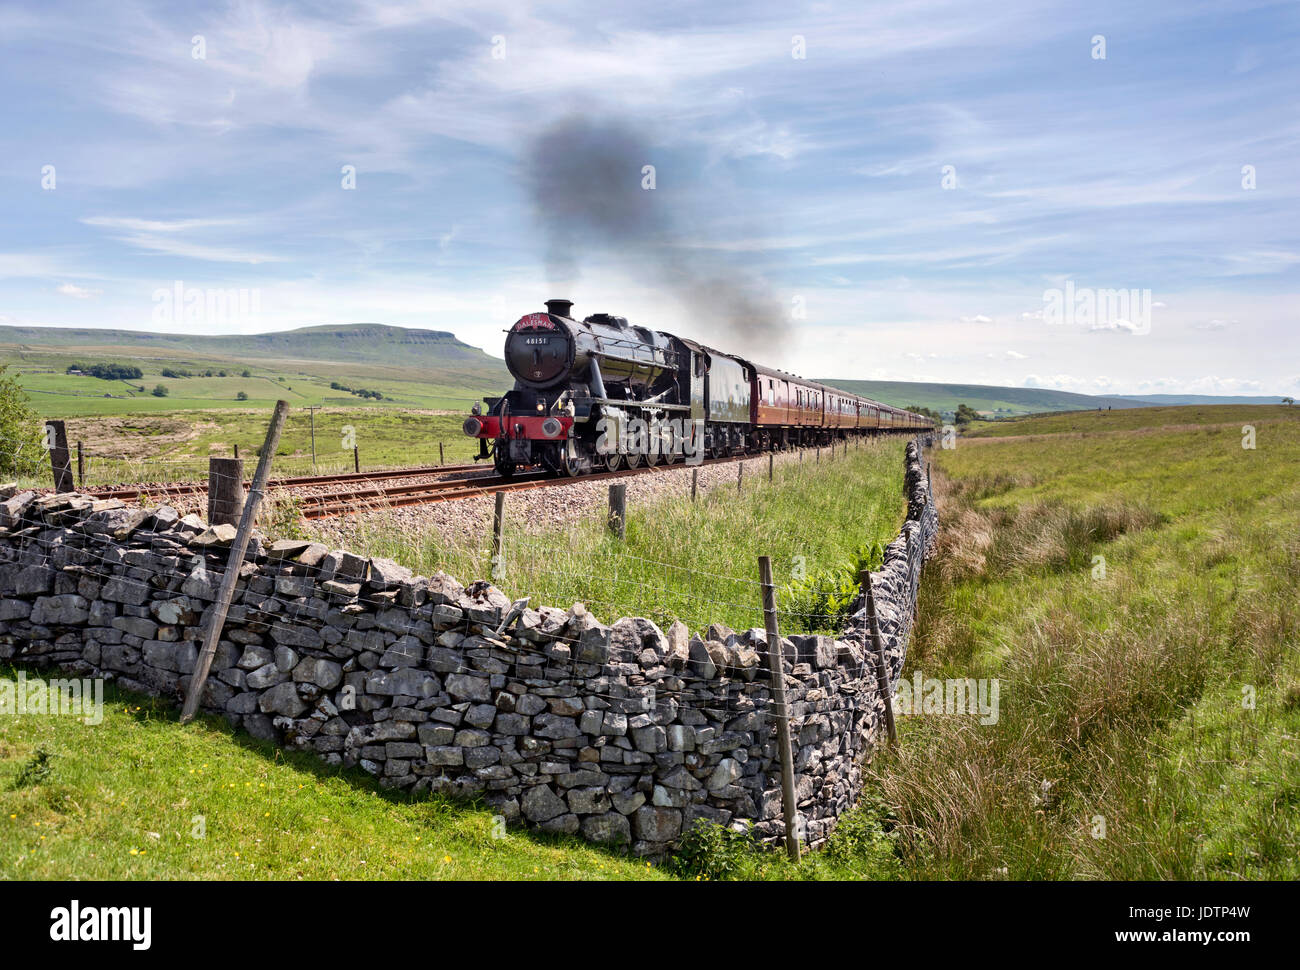 The Dalesman steam special at Selside on the Settle- Carlisle railway line, with Pen-y-Ghent peak on the horizon, Yorkshire Dales National Park, UK. Stock Photo